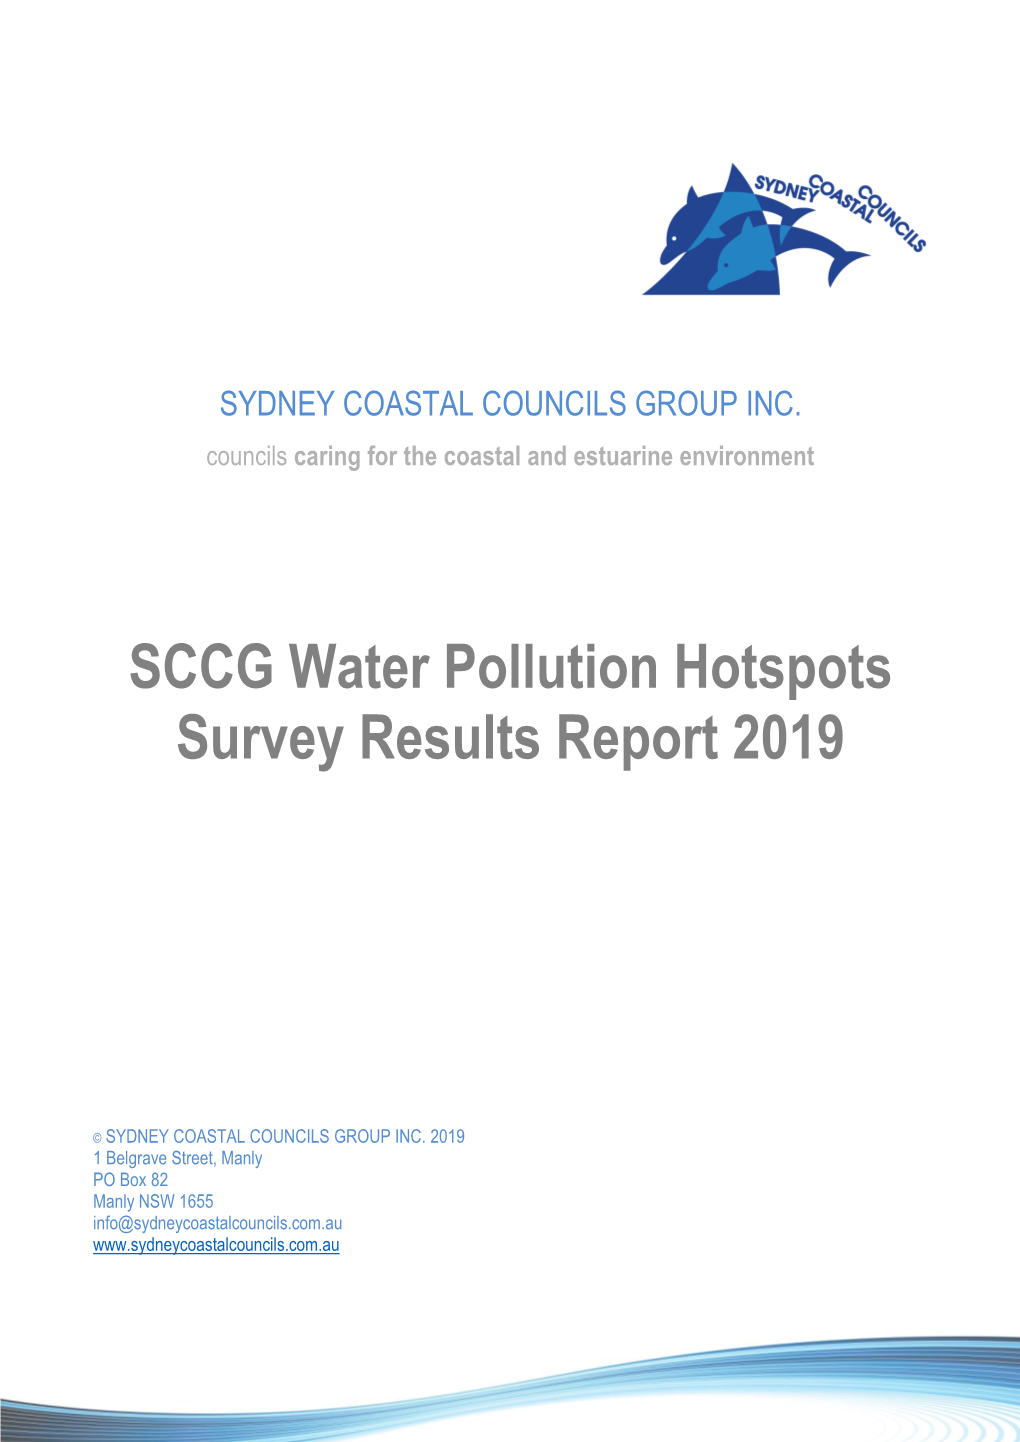 SCCG Water Pollution Hotspots Survey Results Report 2019